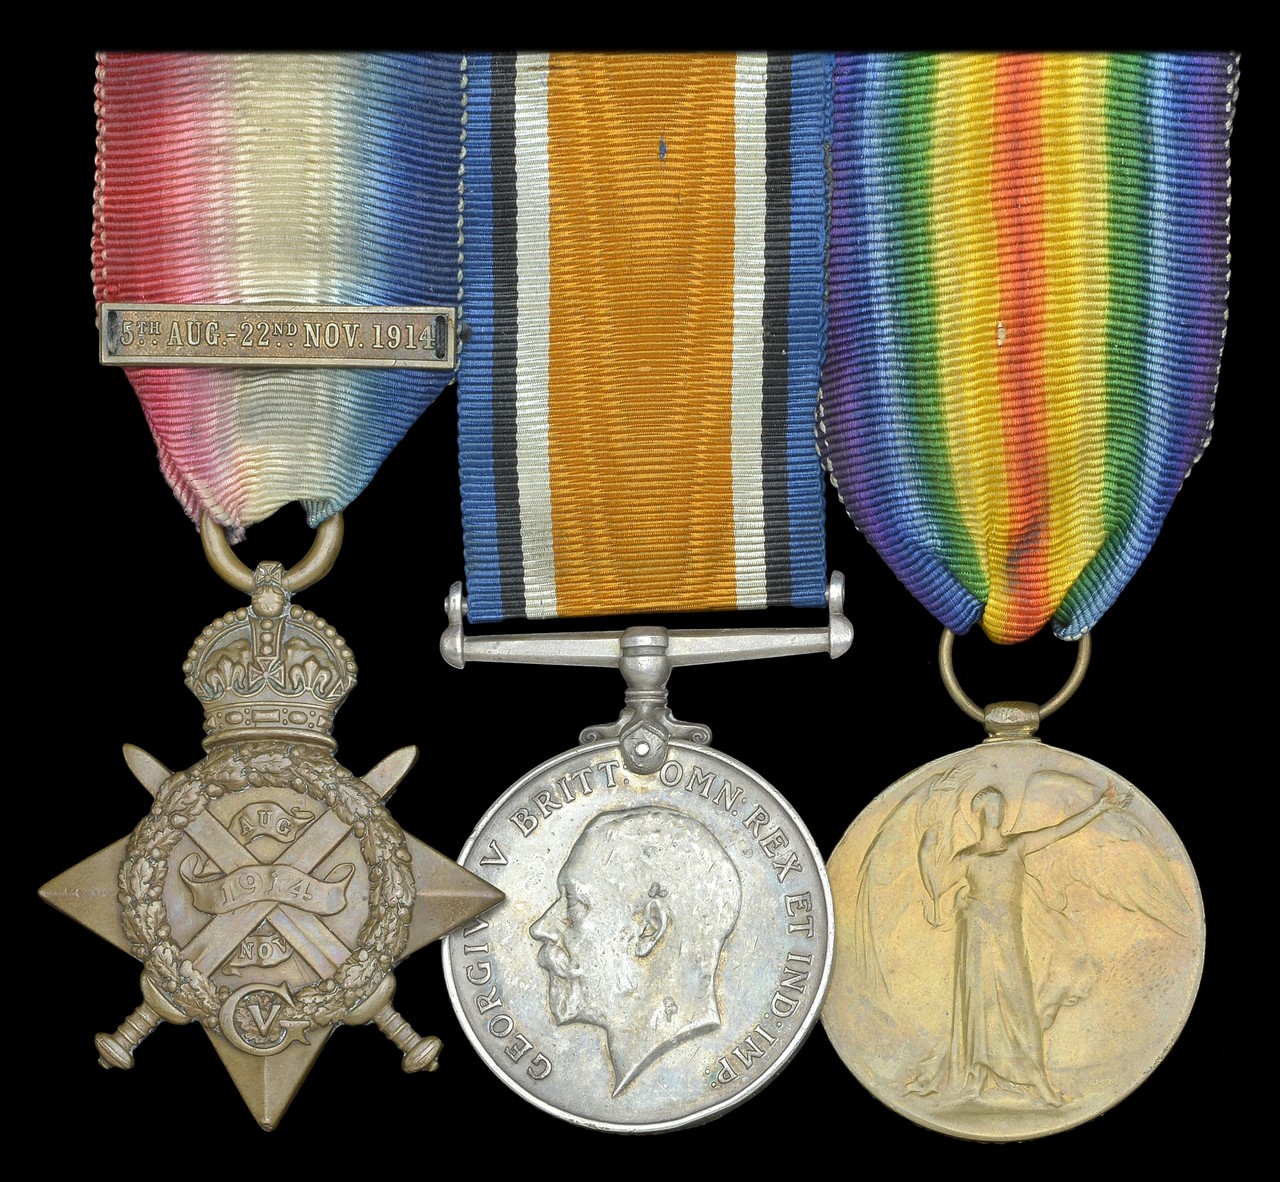 Three: Private G. Heley, West Yorkshire Regiment 1914 Star, with clasp (7747 Pte., 1/W. York. R.);